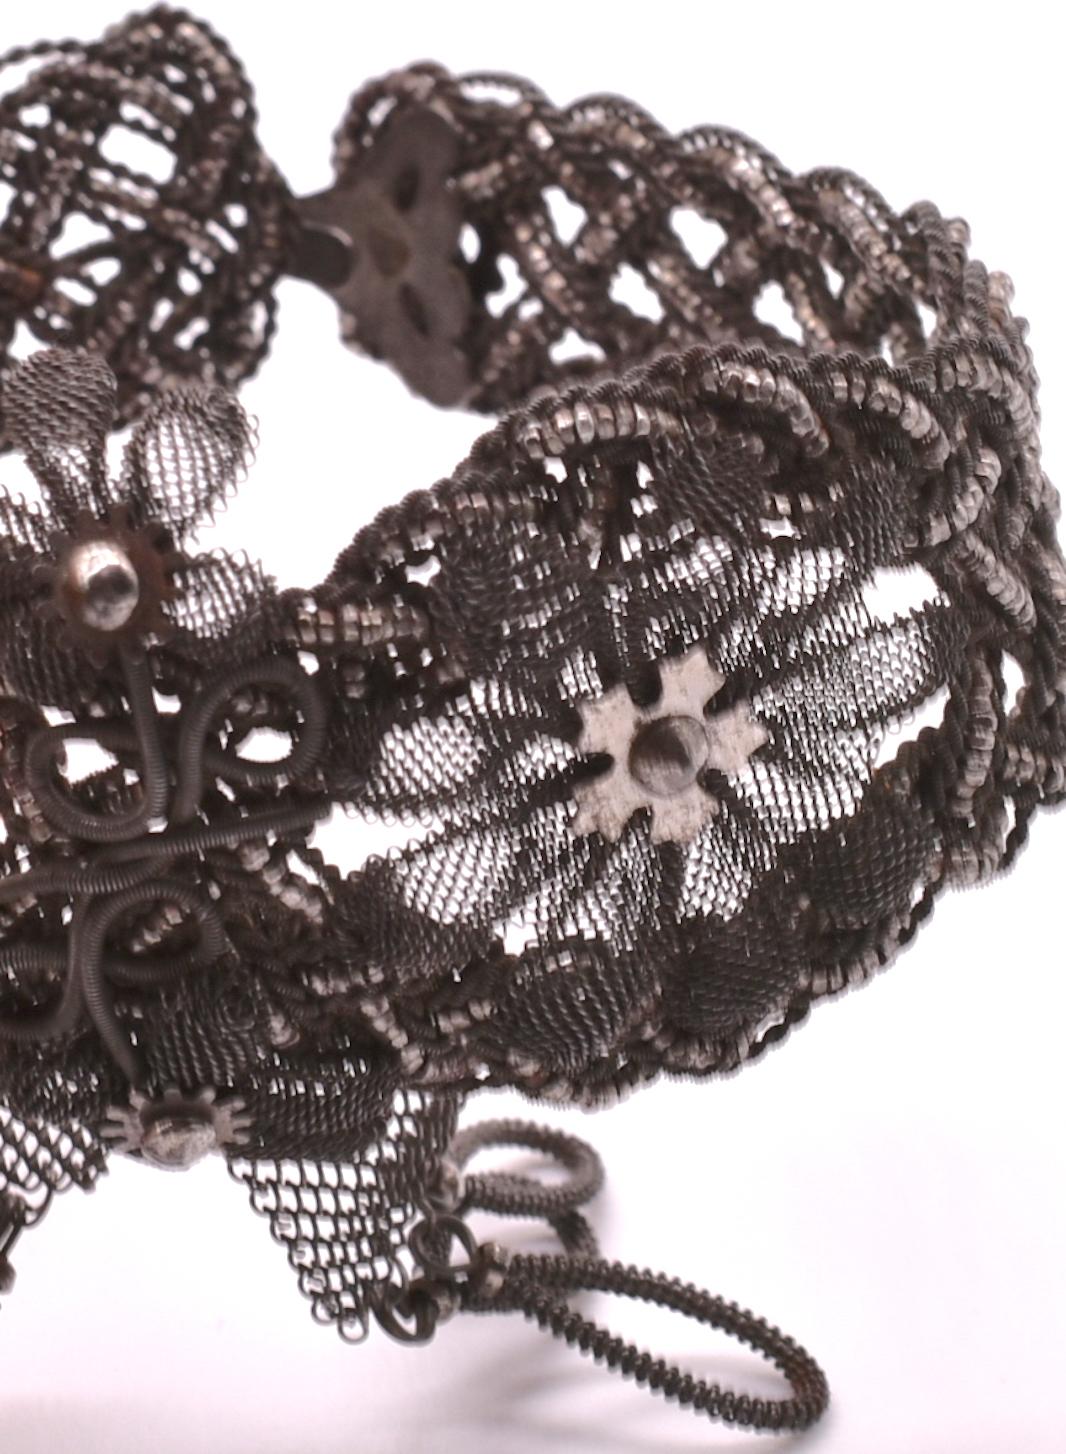 Silesian wire was originally made in the medieval town of Gleiwitz in Silesia and was thought to have been made by gunsmiths and armor workers. This Silesian Wirework Braided Cuff Bracelet has intricately layered flowers woven of wire with ties that